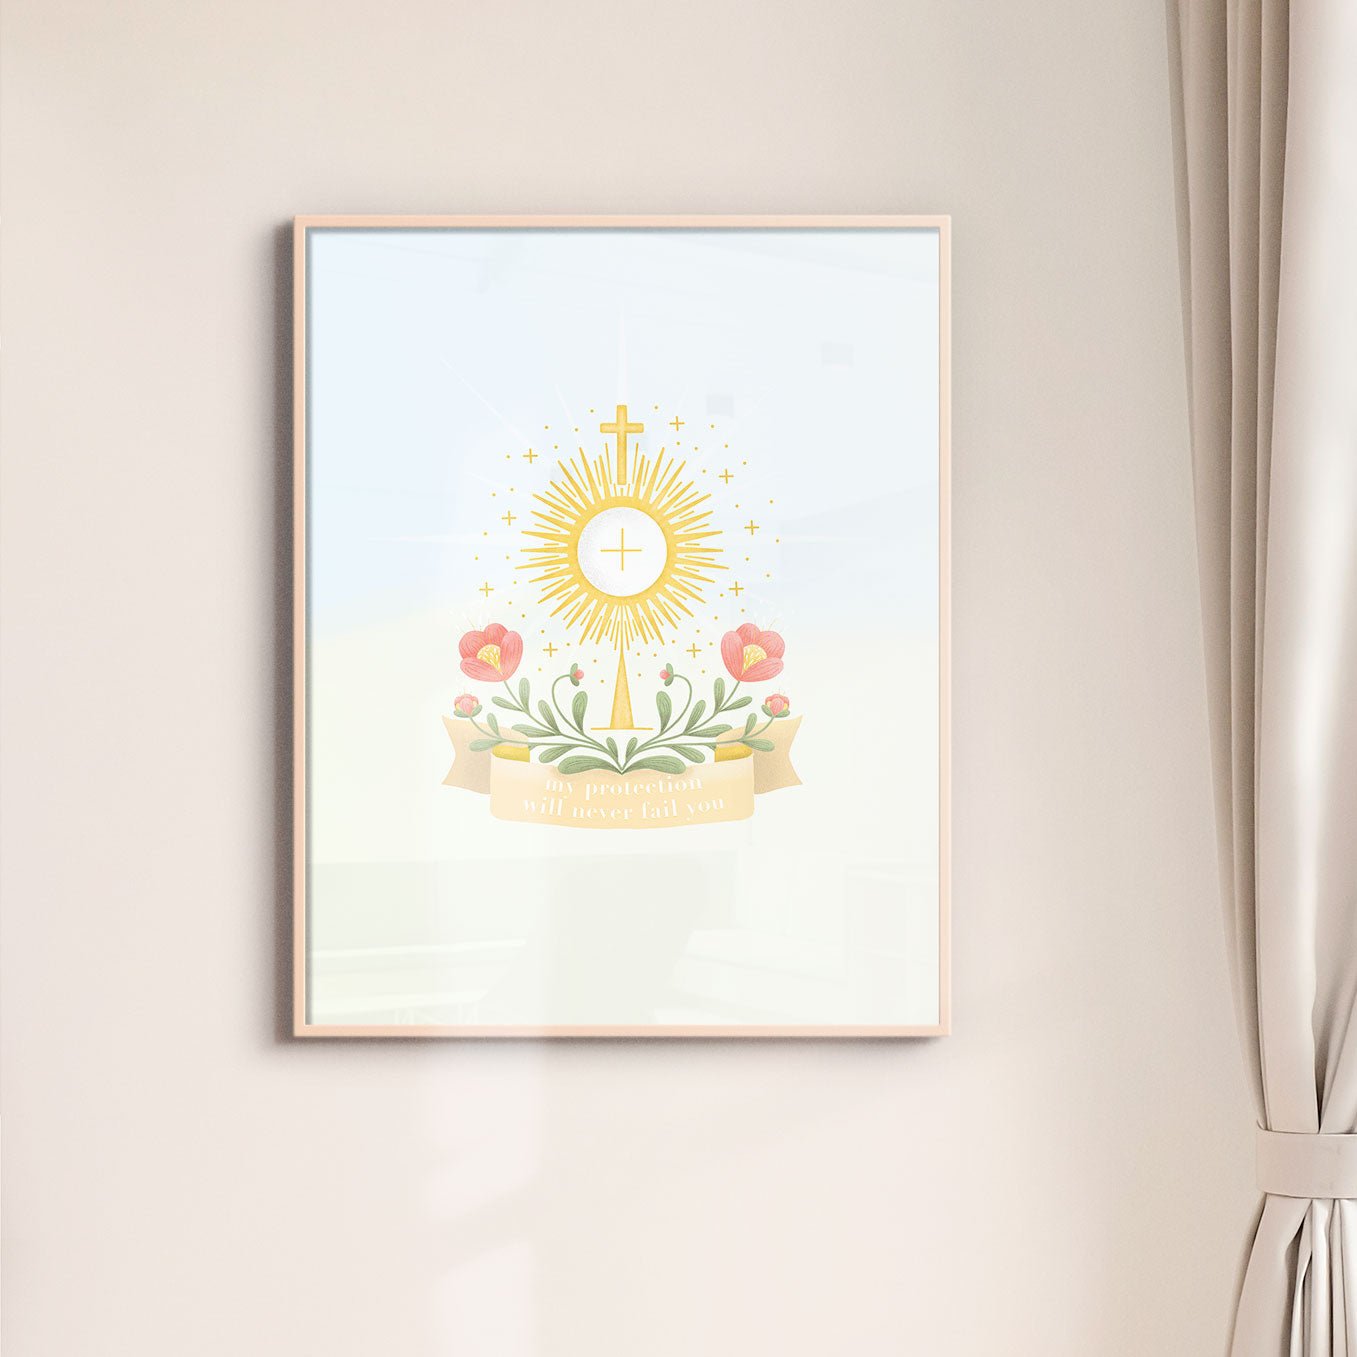 St. Clare of Assisi Printable - Little Way Design Co.